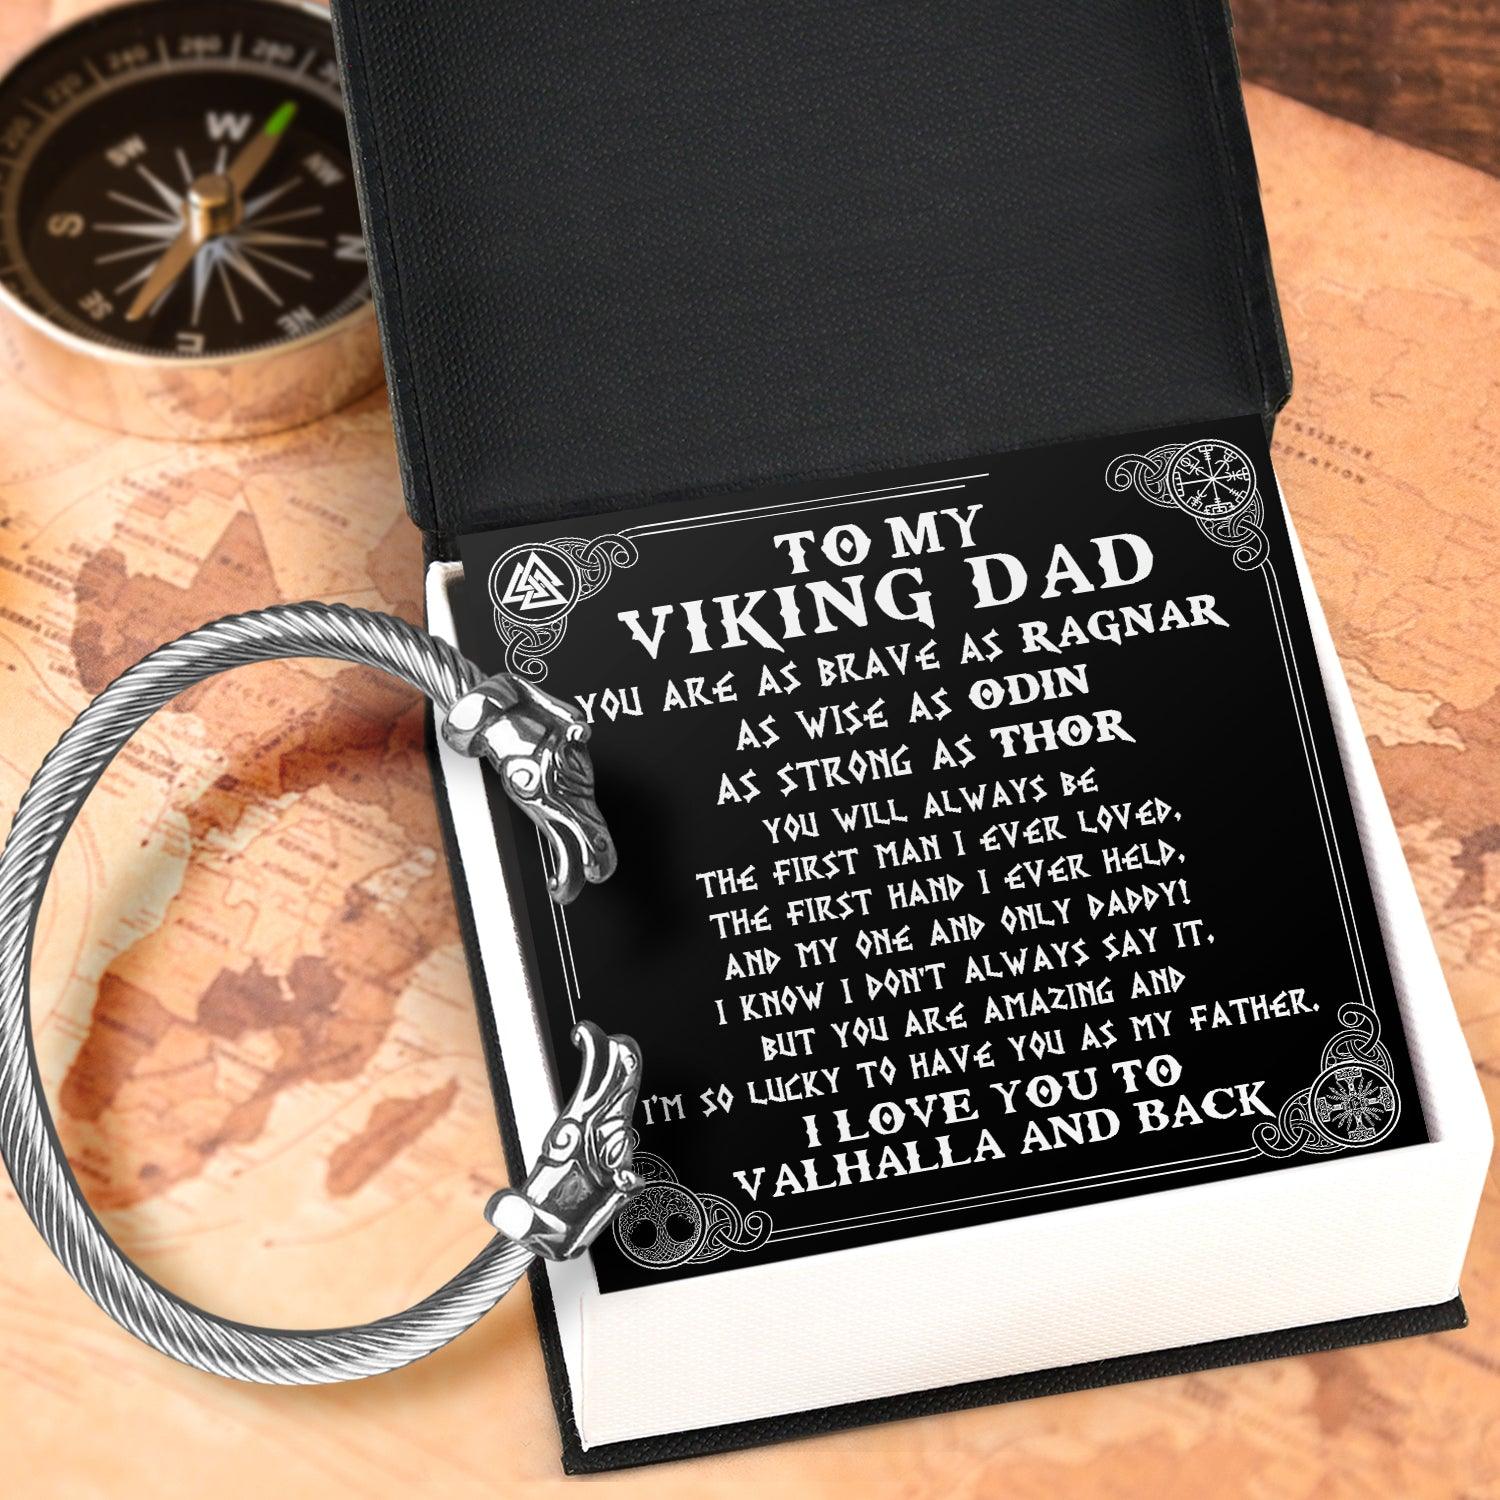 Norse Dragon Bracelet - Viking - From Daughter - To My Dad - I Love You To Valhalla And Back - Augbzi18001 - Gifts Holder